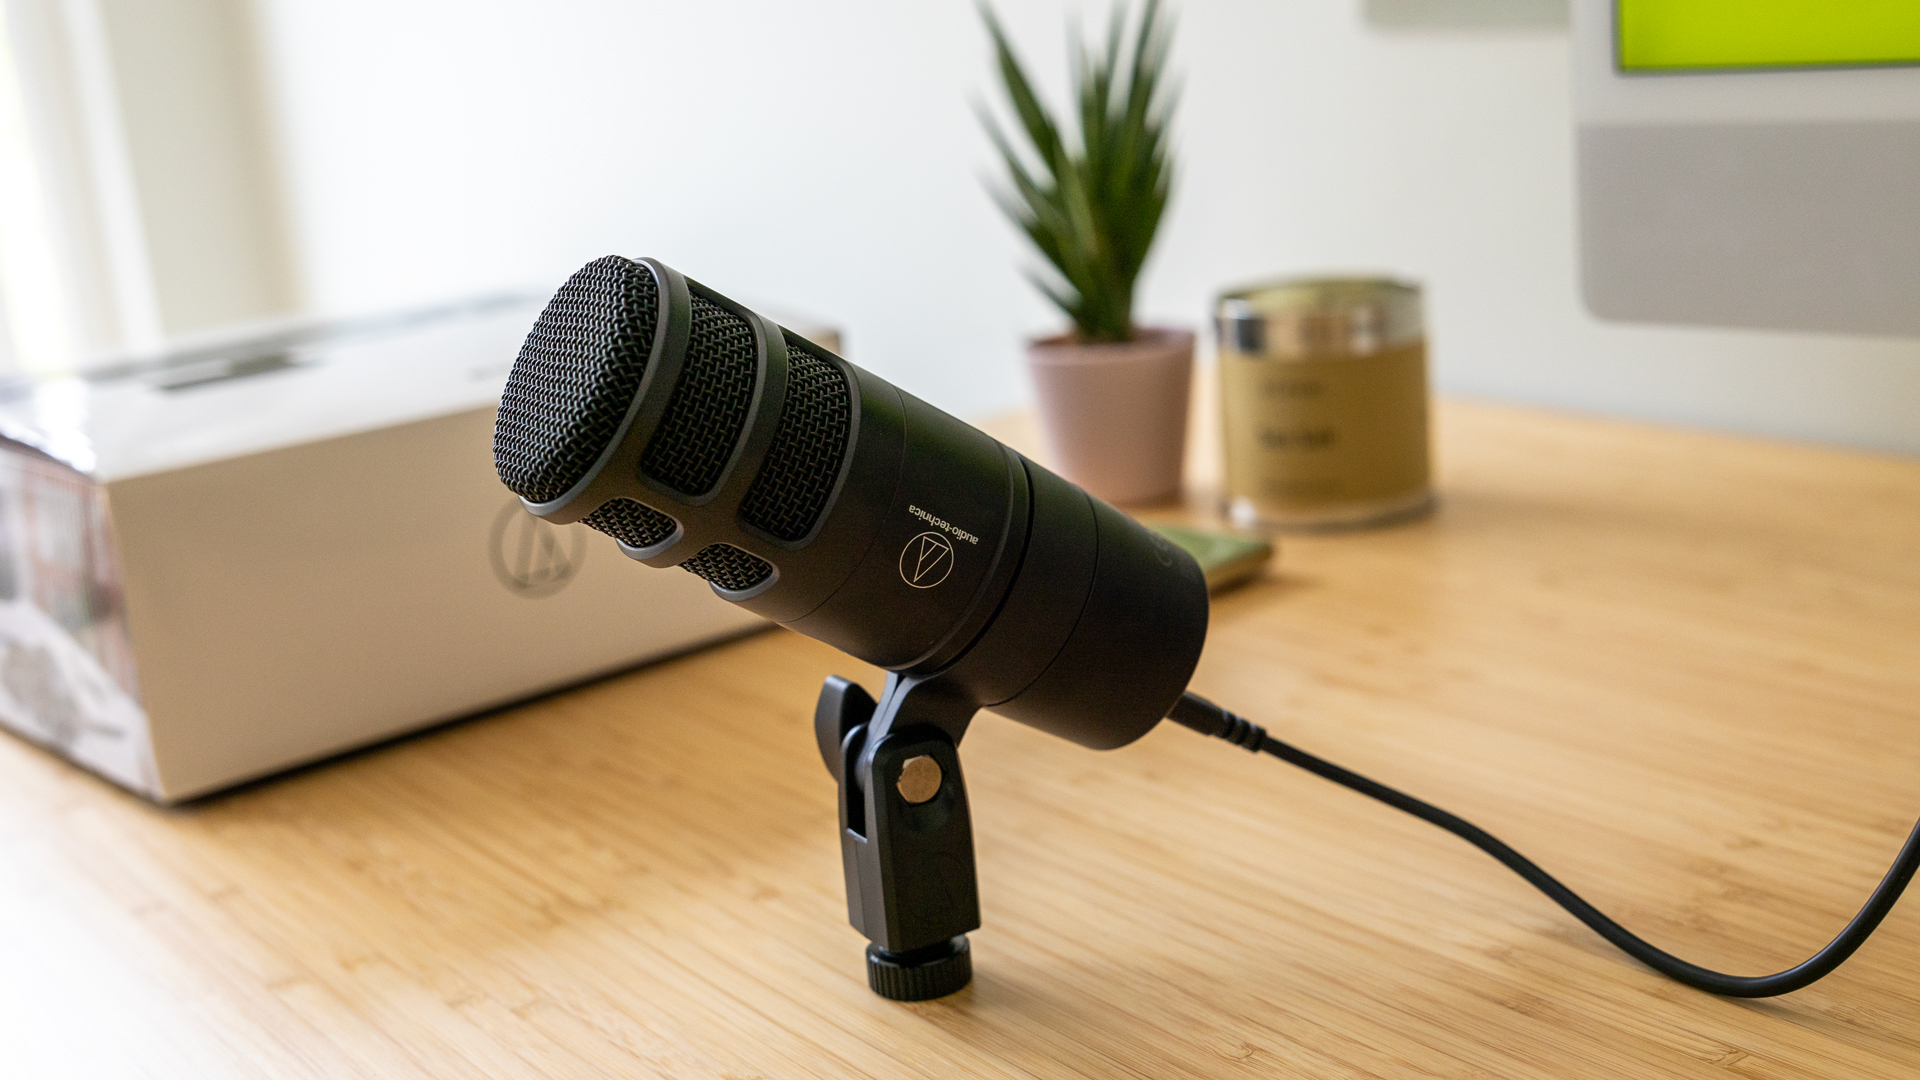 TOP 10 Best Microphones for Gaming & Streaming 